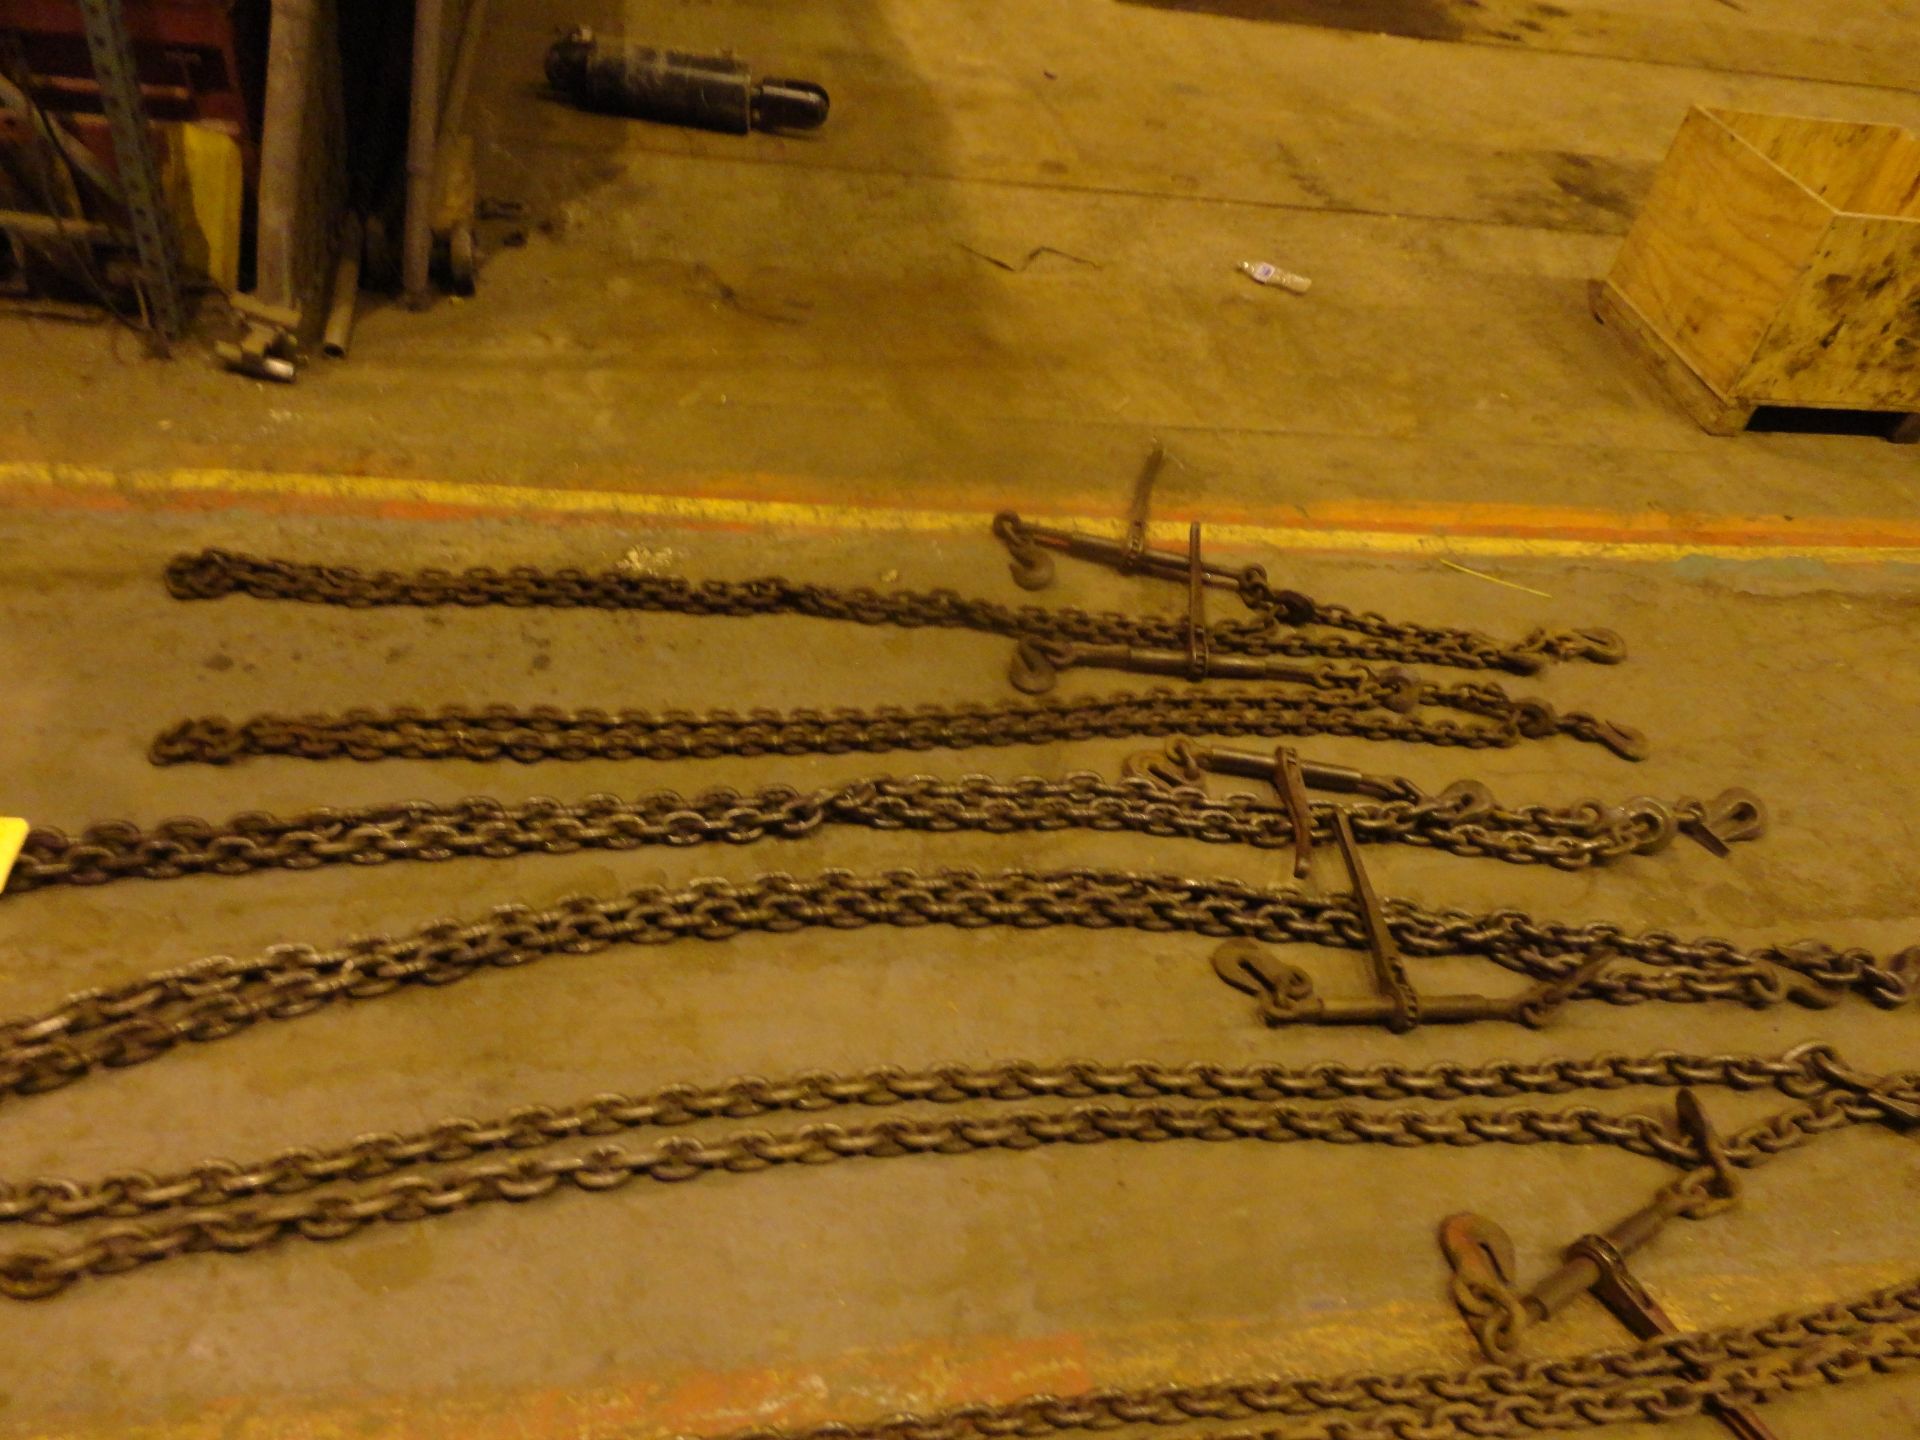 Lot of Six 5/8" and 1/2" Chains with Binders (#18) - Image 4 of 10